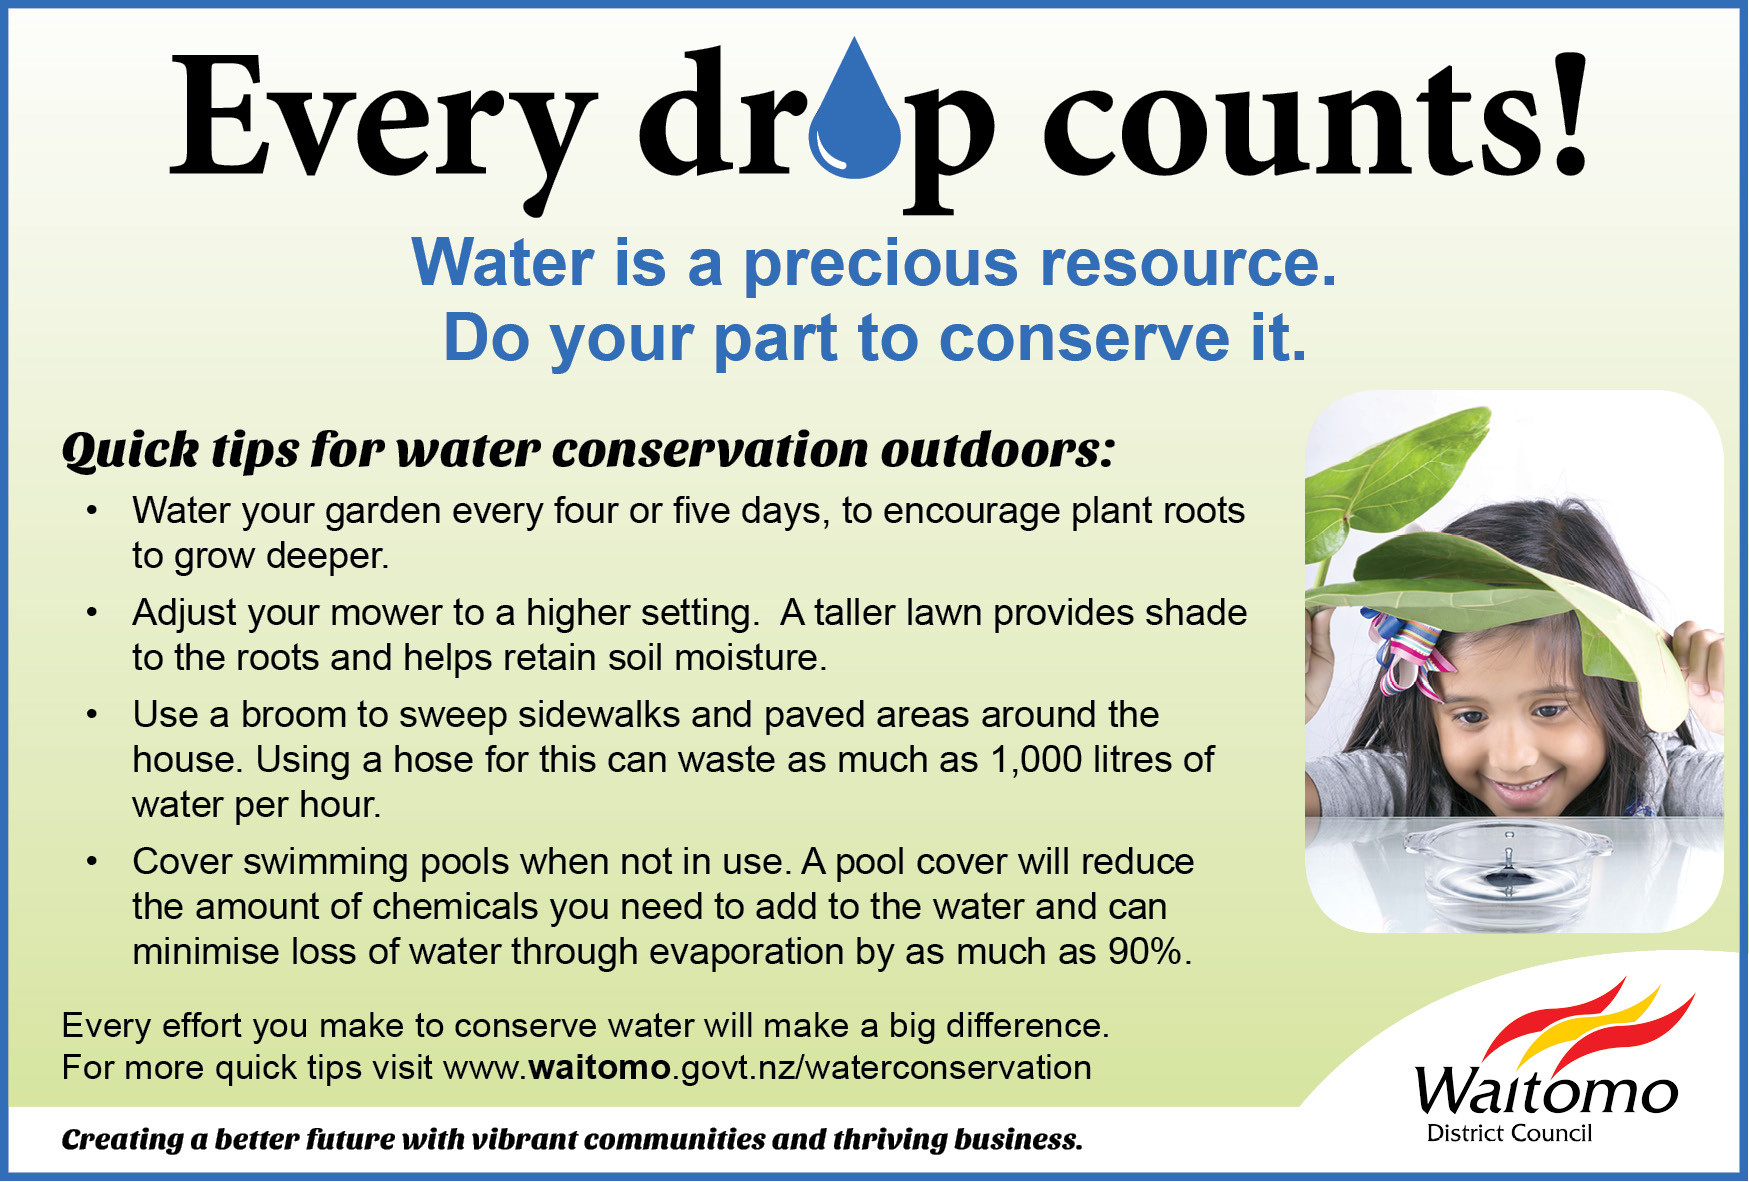 Tips for water conservation outdoors